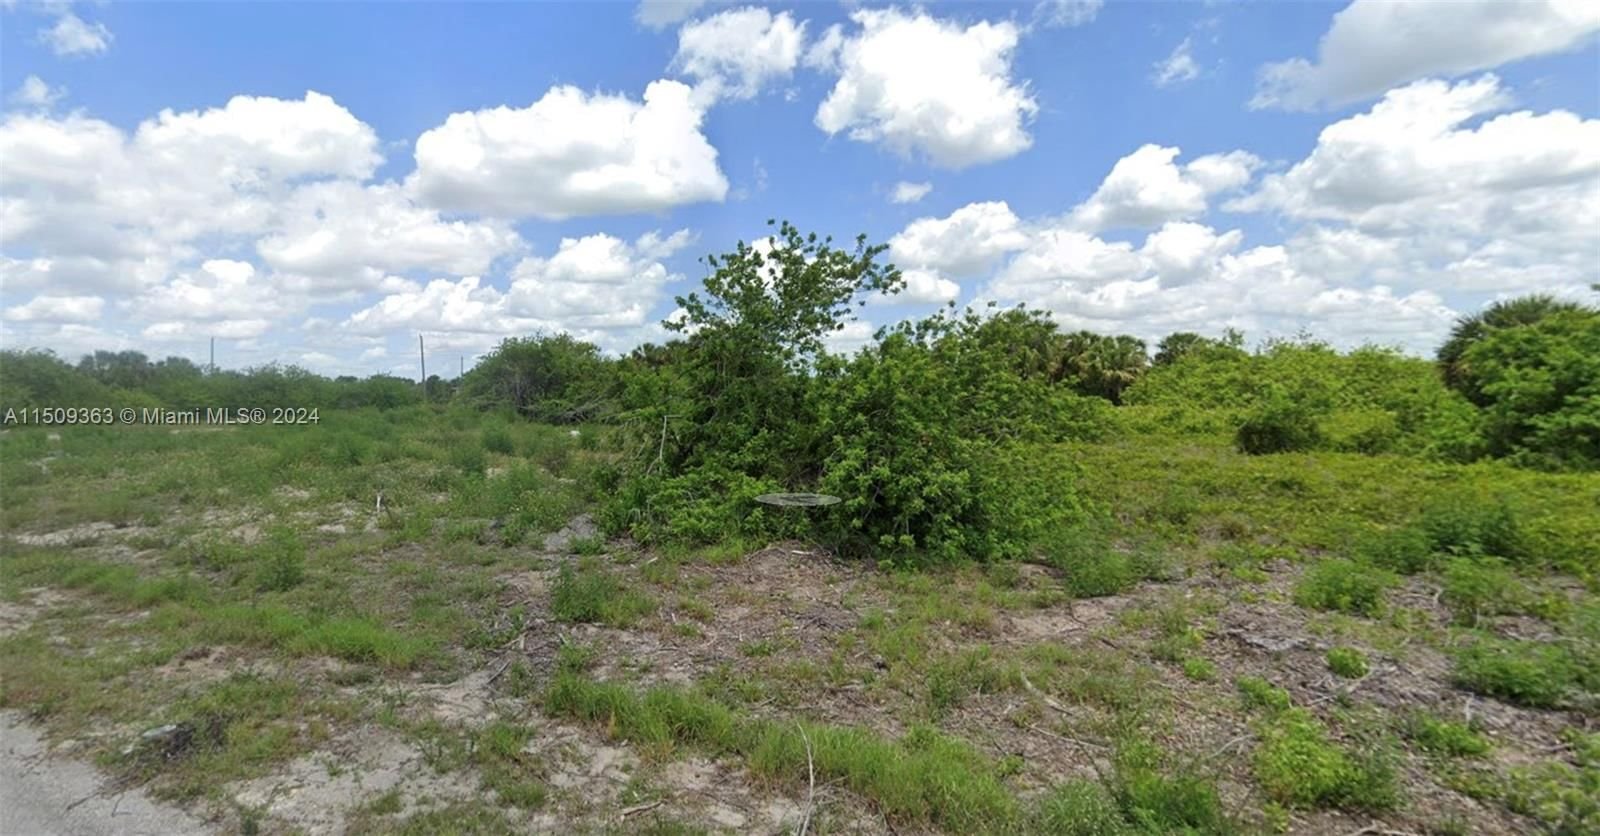 Real estate property located at 8002 Toy Lane, Hendry County, Port Labelle, La Belle, FL